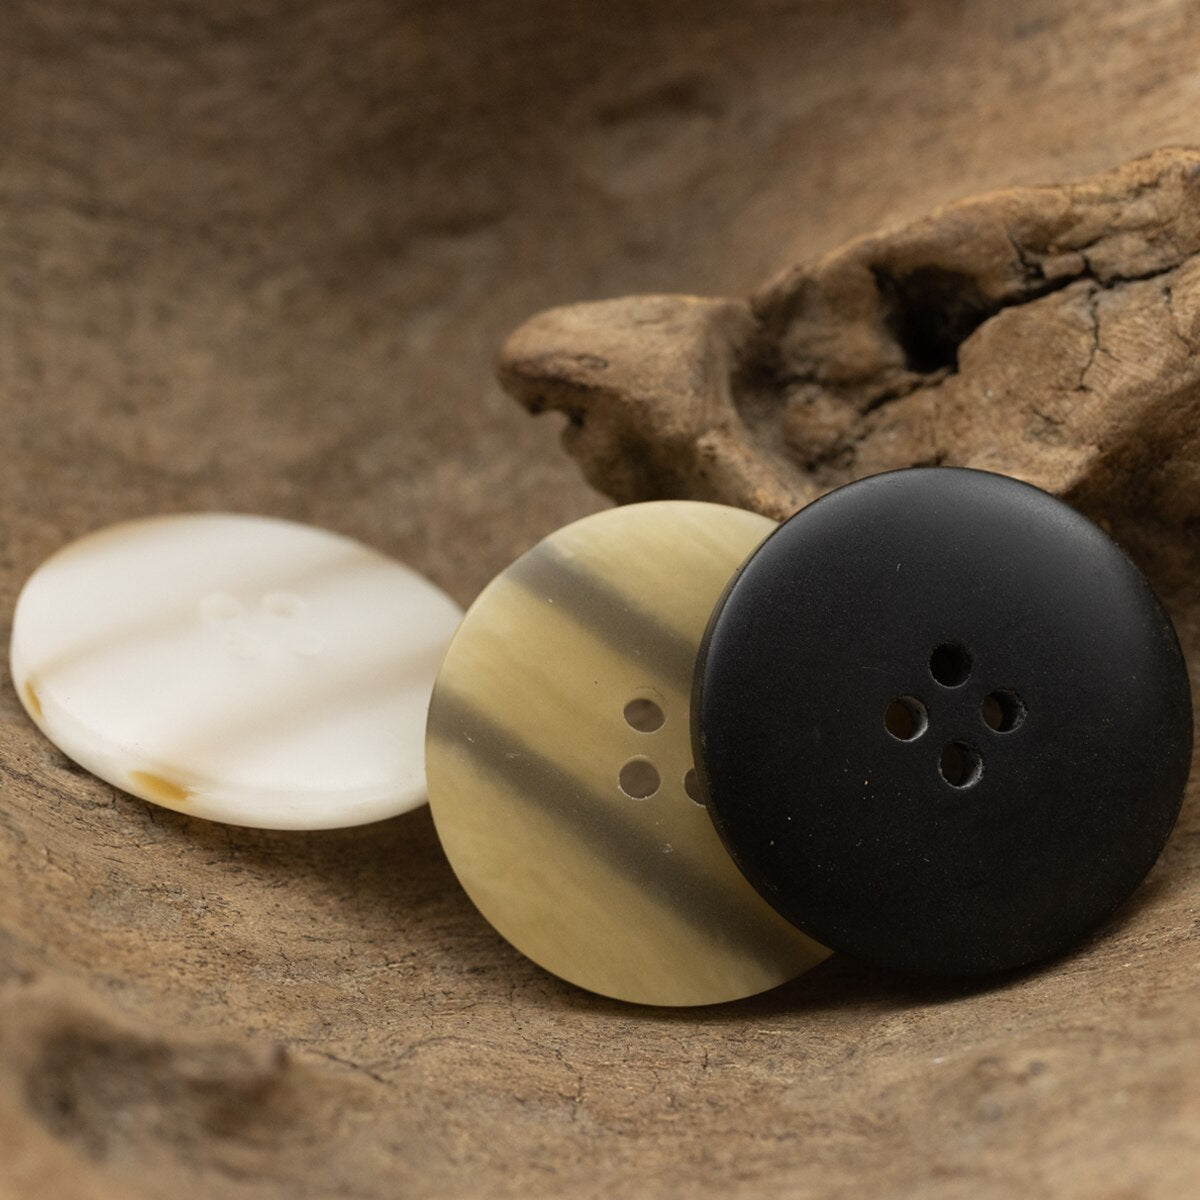 Wood Imitation Resin Buttons Small Rim White Beige Black Round Buttons